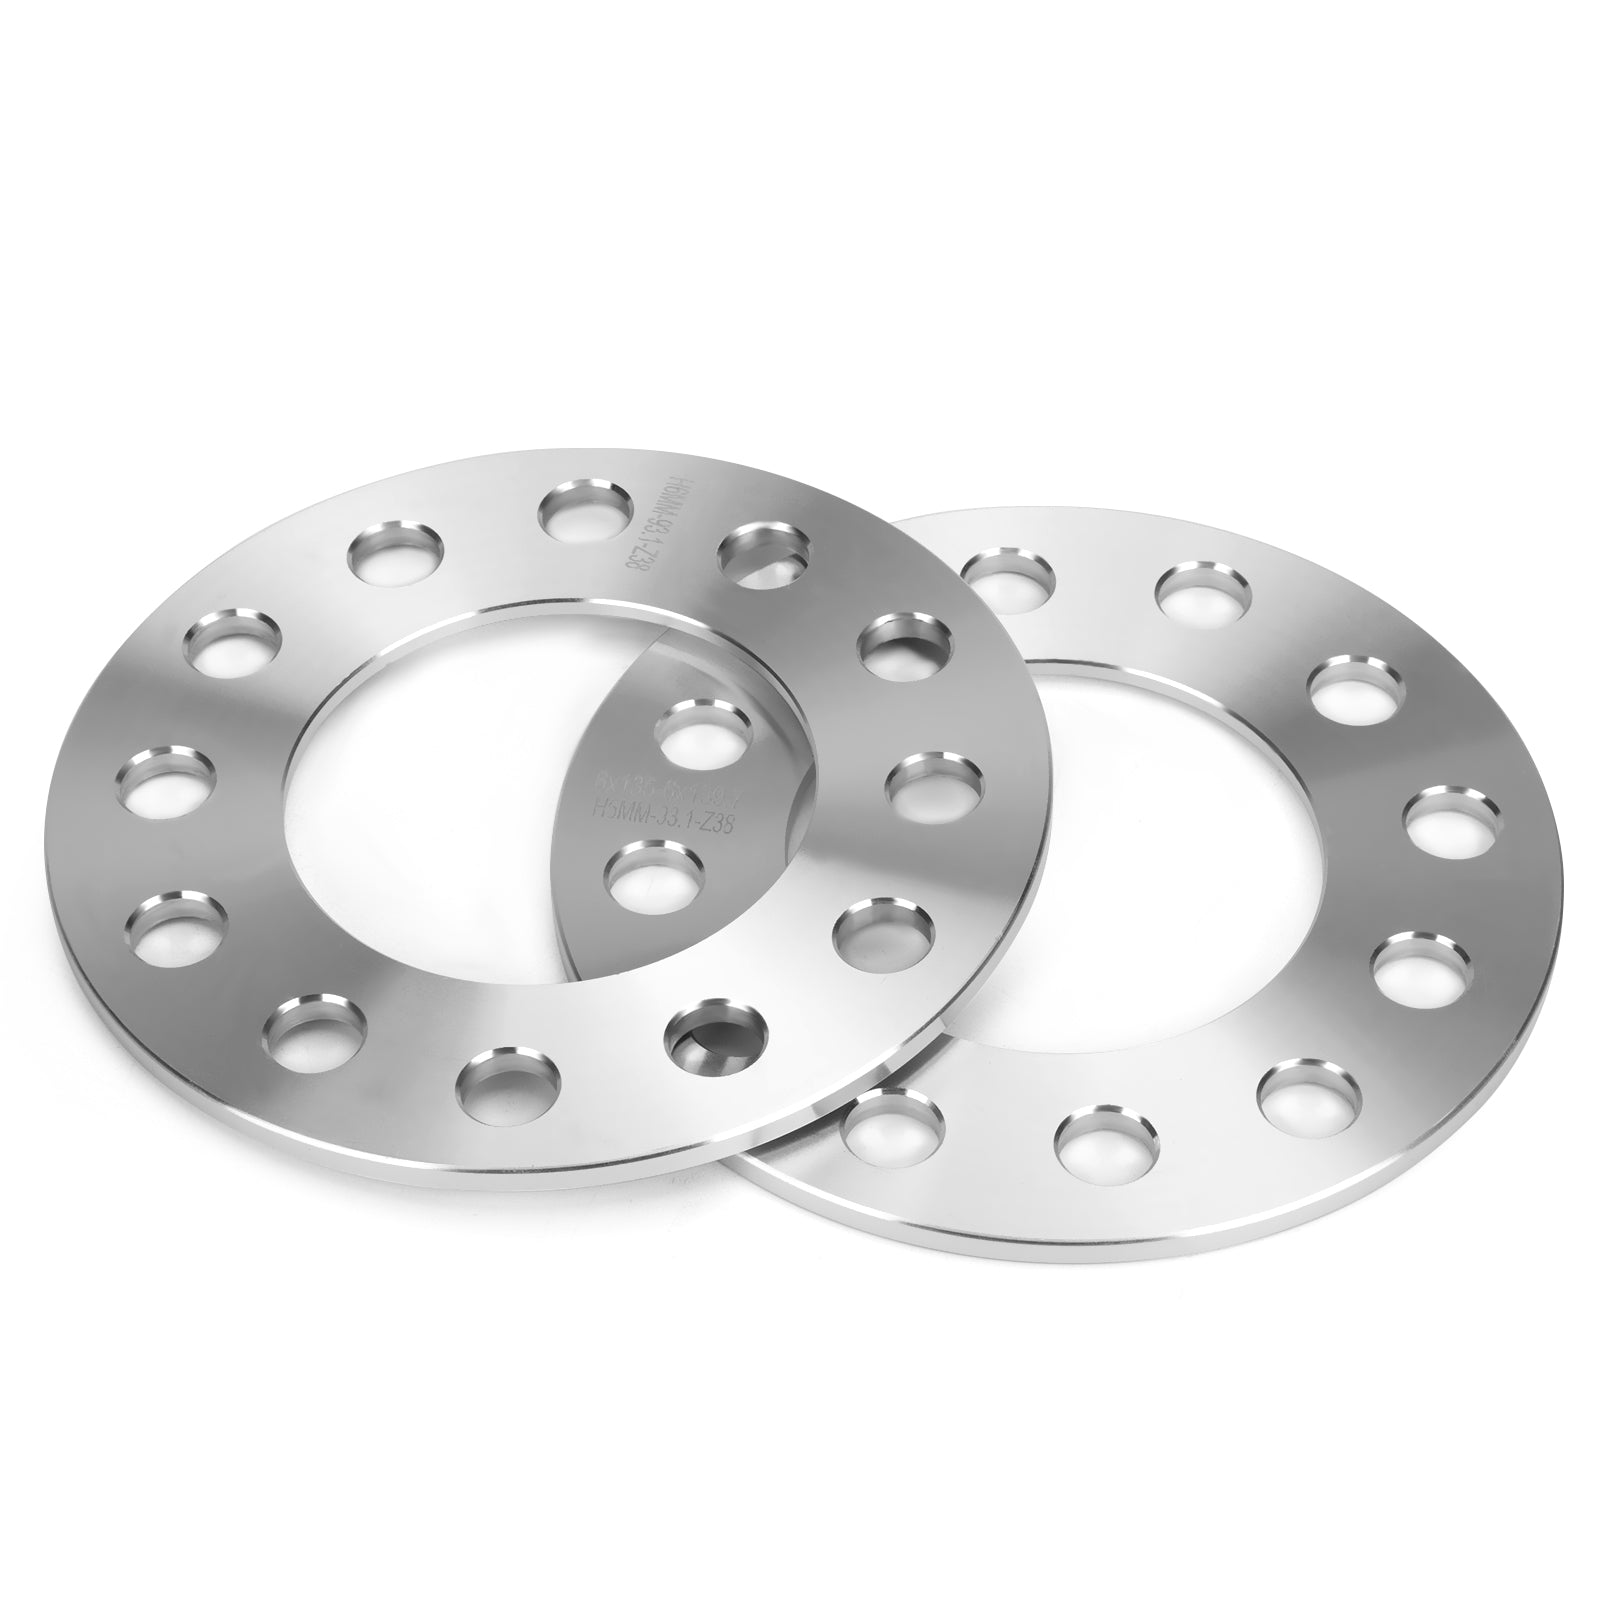 2 pcs Universal Wheel Spacers 6/12mm For 6x5.5 6x135 6x139.7 Spacer for Ranger Bronco F150 Silverado Sierra Ram 1500 Expedition